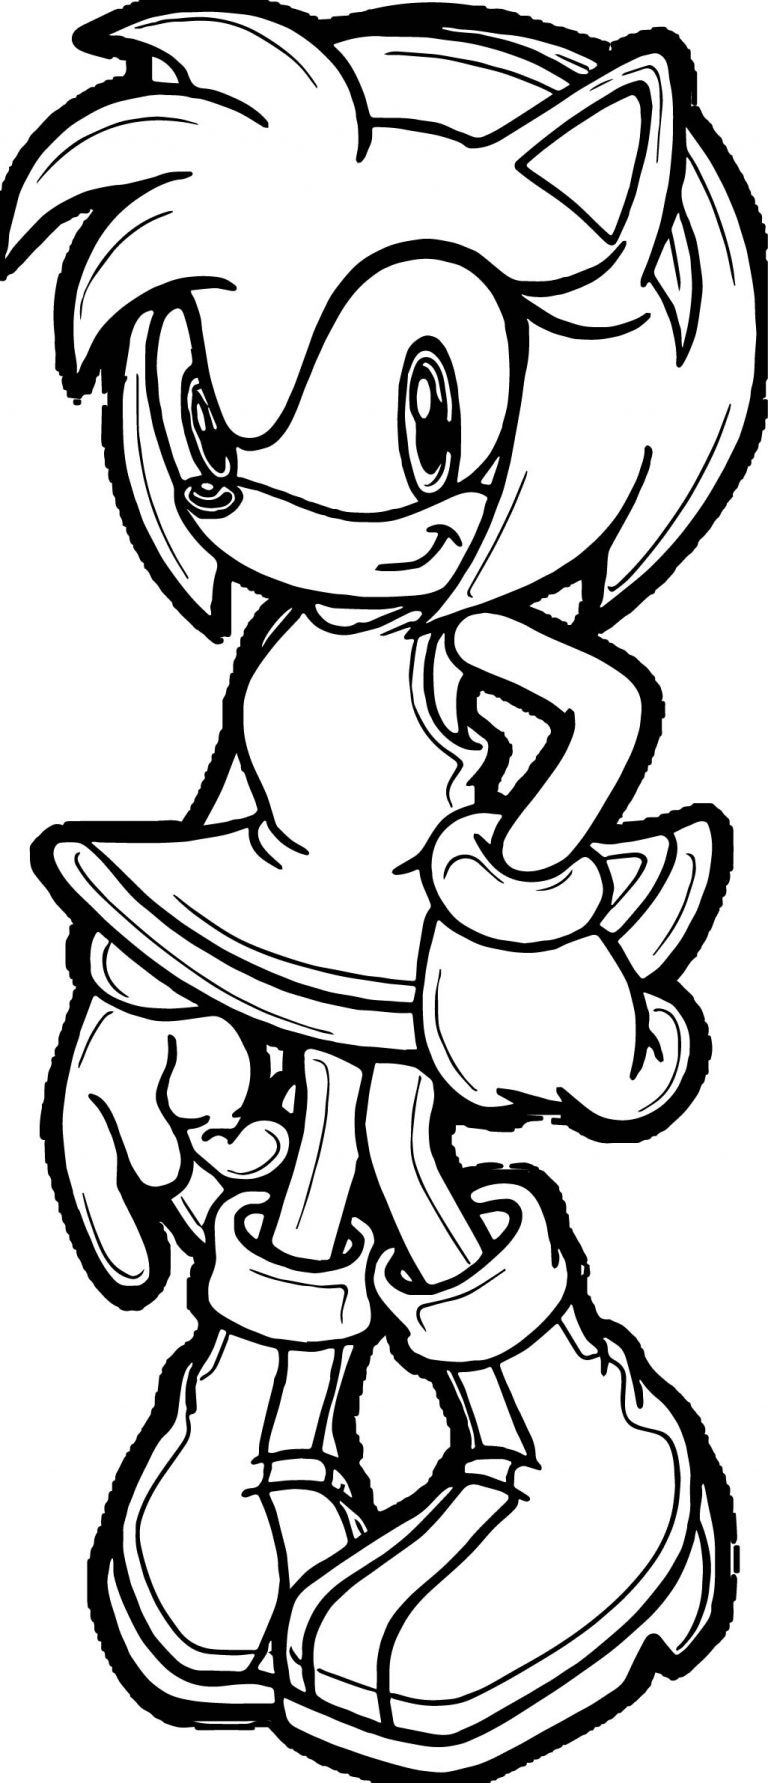 Amy Rose Shirt Coloring Page | Wecoloringpage.com